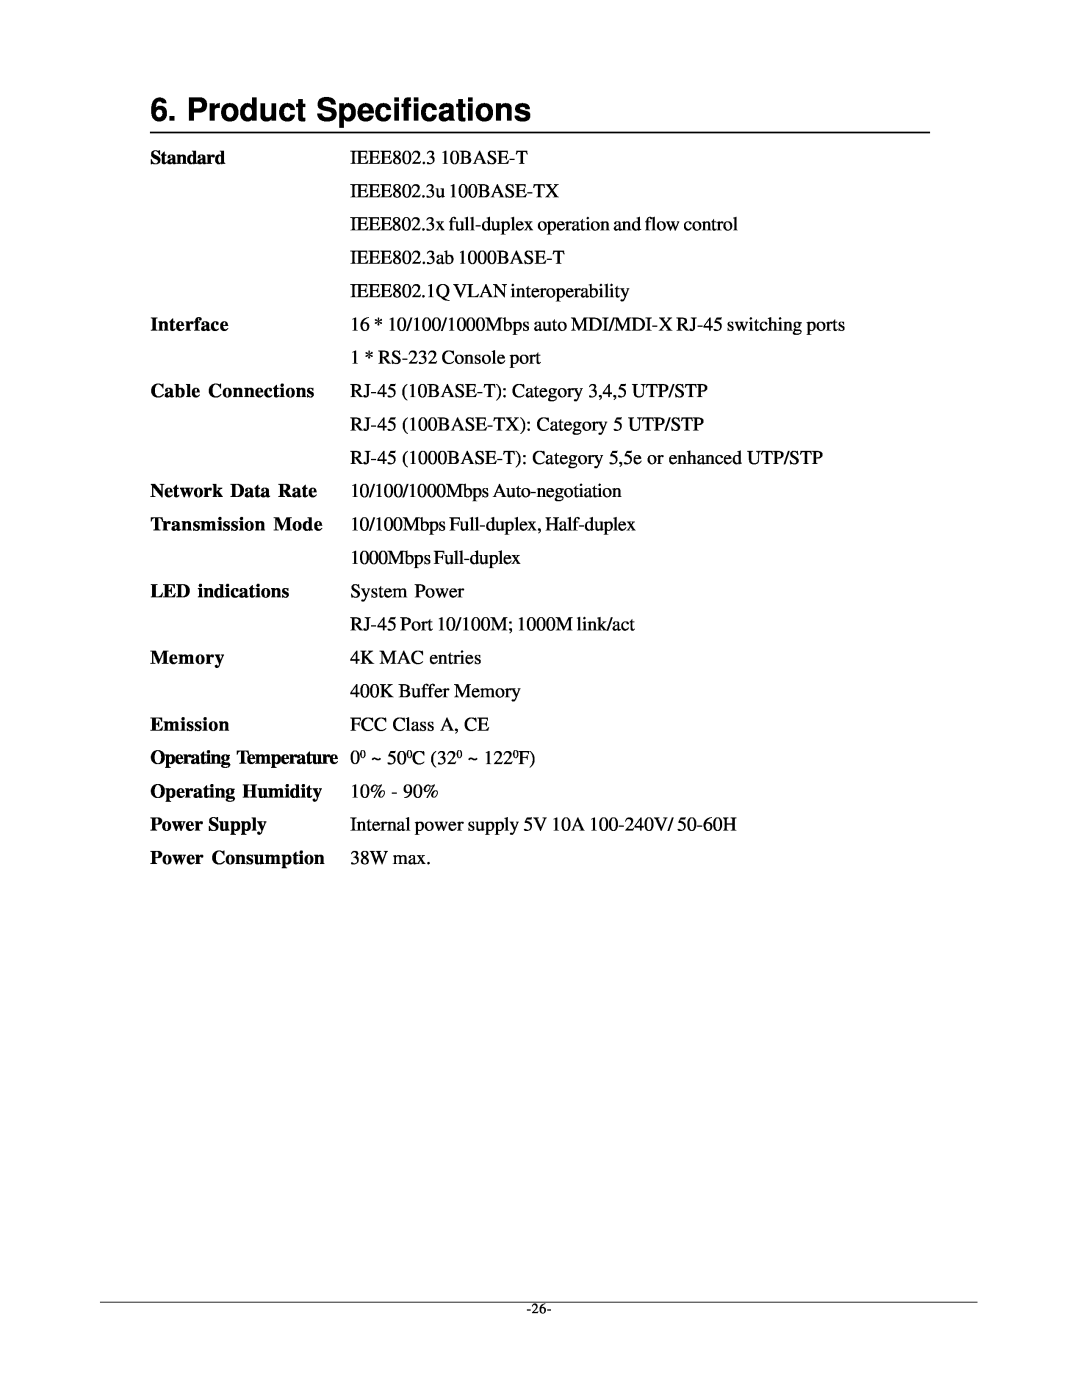 KTI Networks kgs-1601 manual Product Specifications 